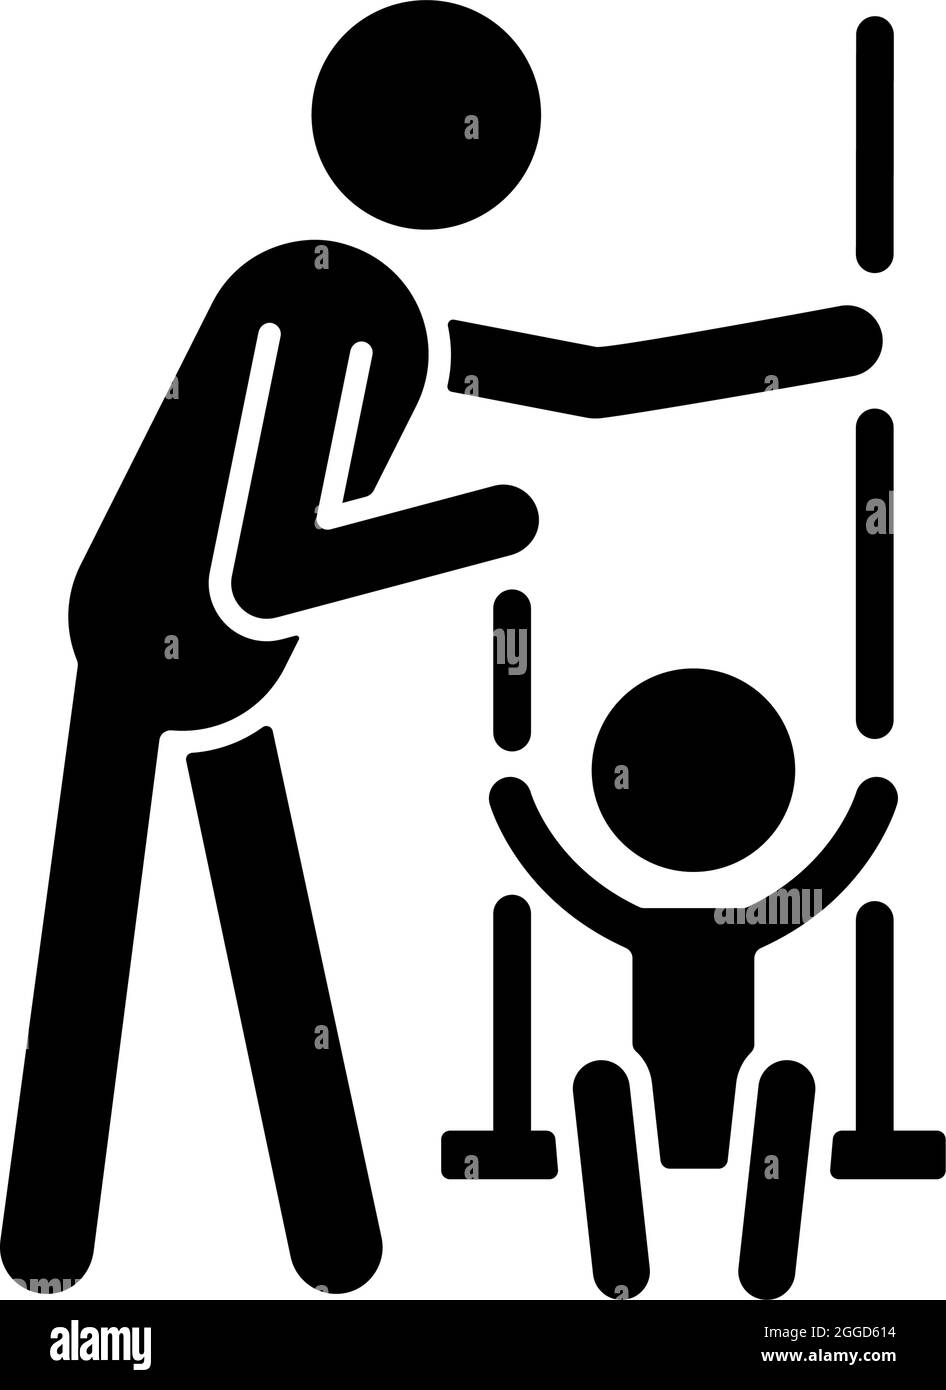 Playing on swings black glyph icon Stock Vector